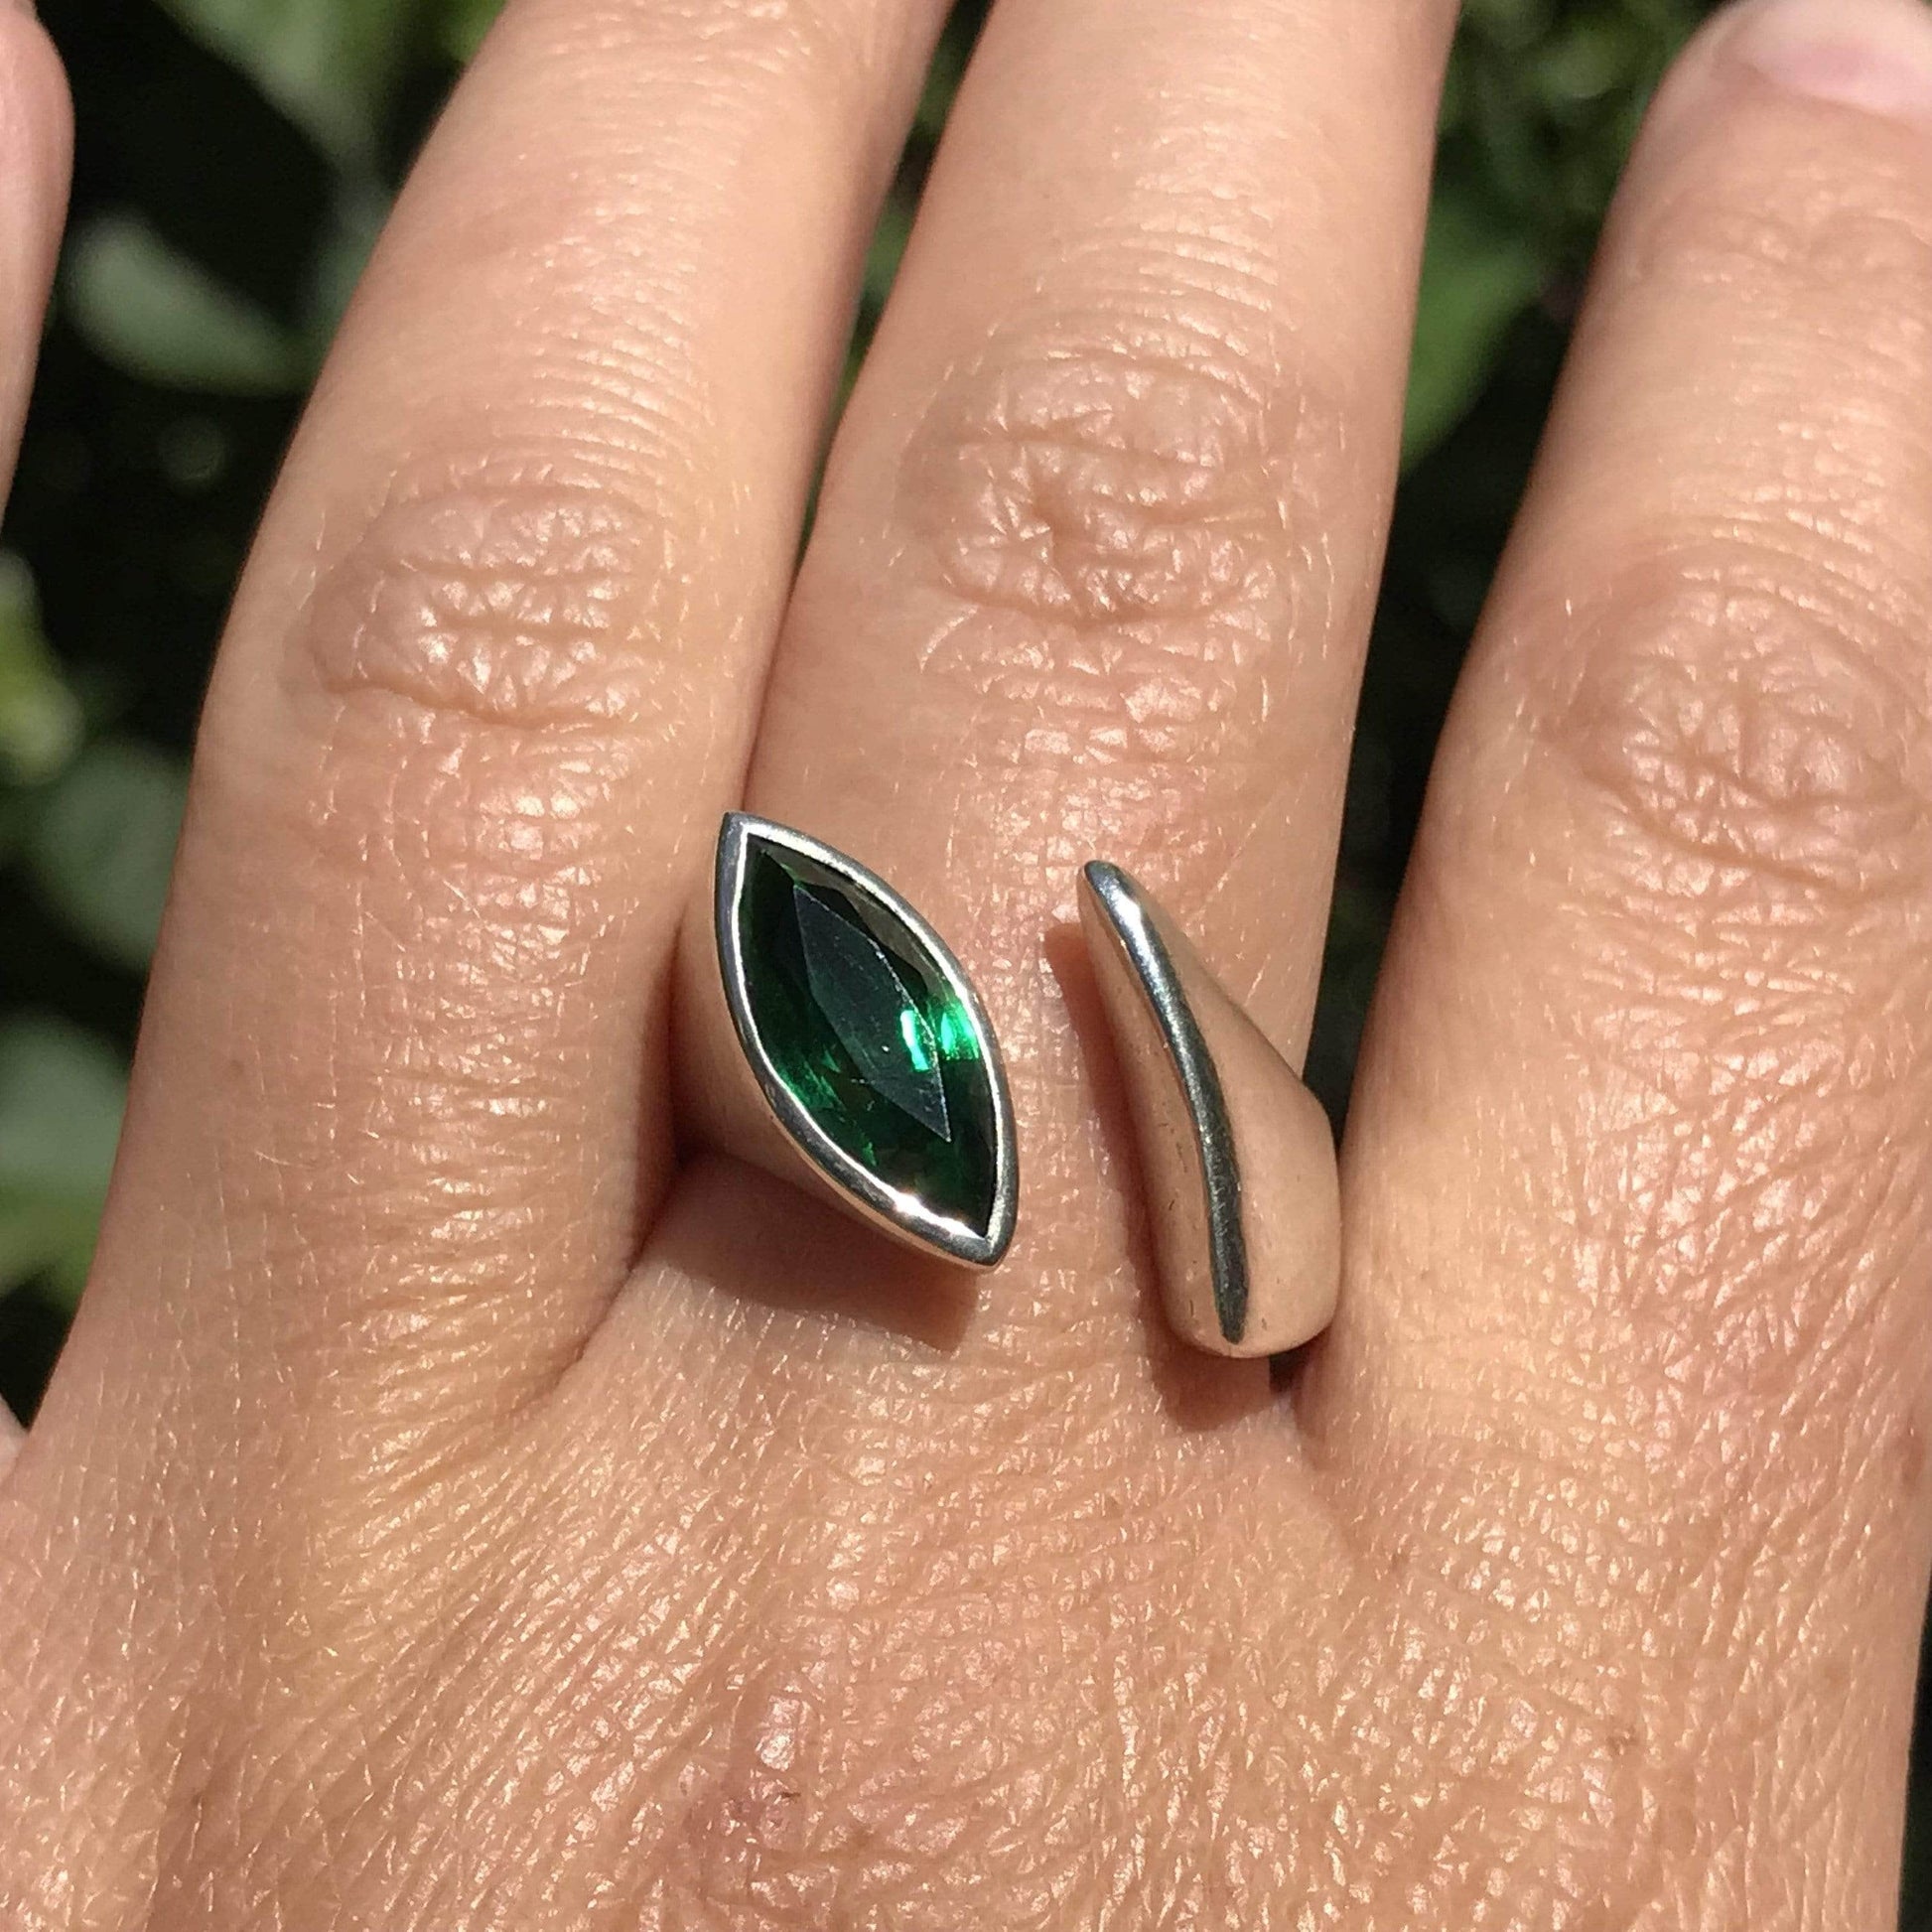 Marquise Green Topaz Envy Sterling Silver Ring Statement Cocktail Ring, ready to ship size 8.5 to 9.5 Sterling Silver Ring Ready To Ship by Nodeform